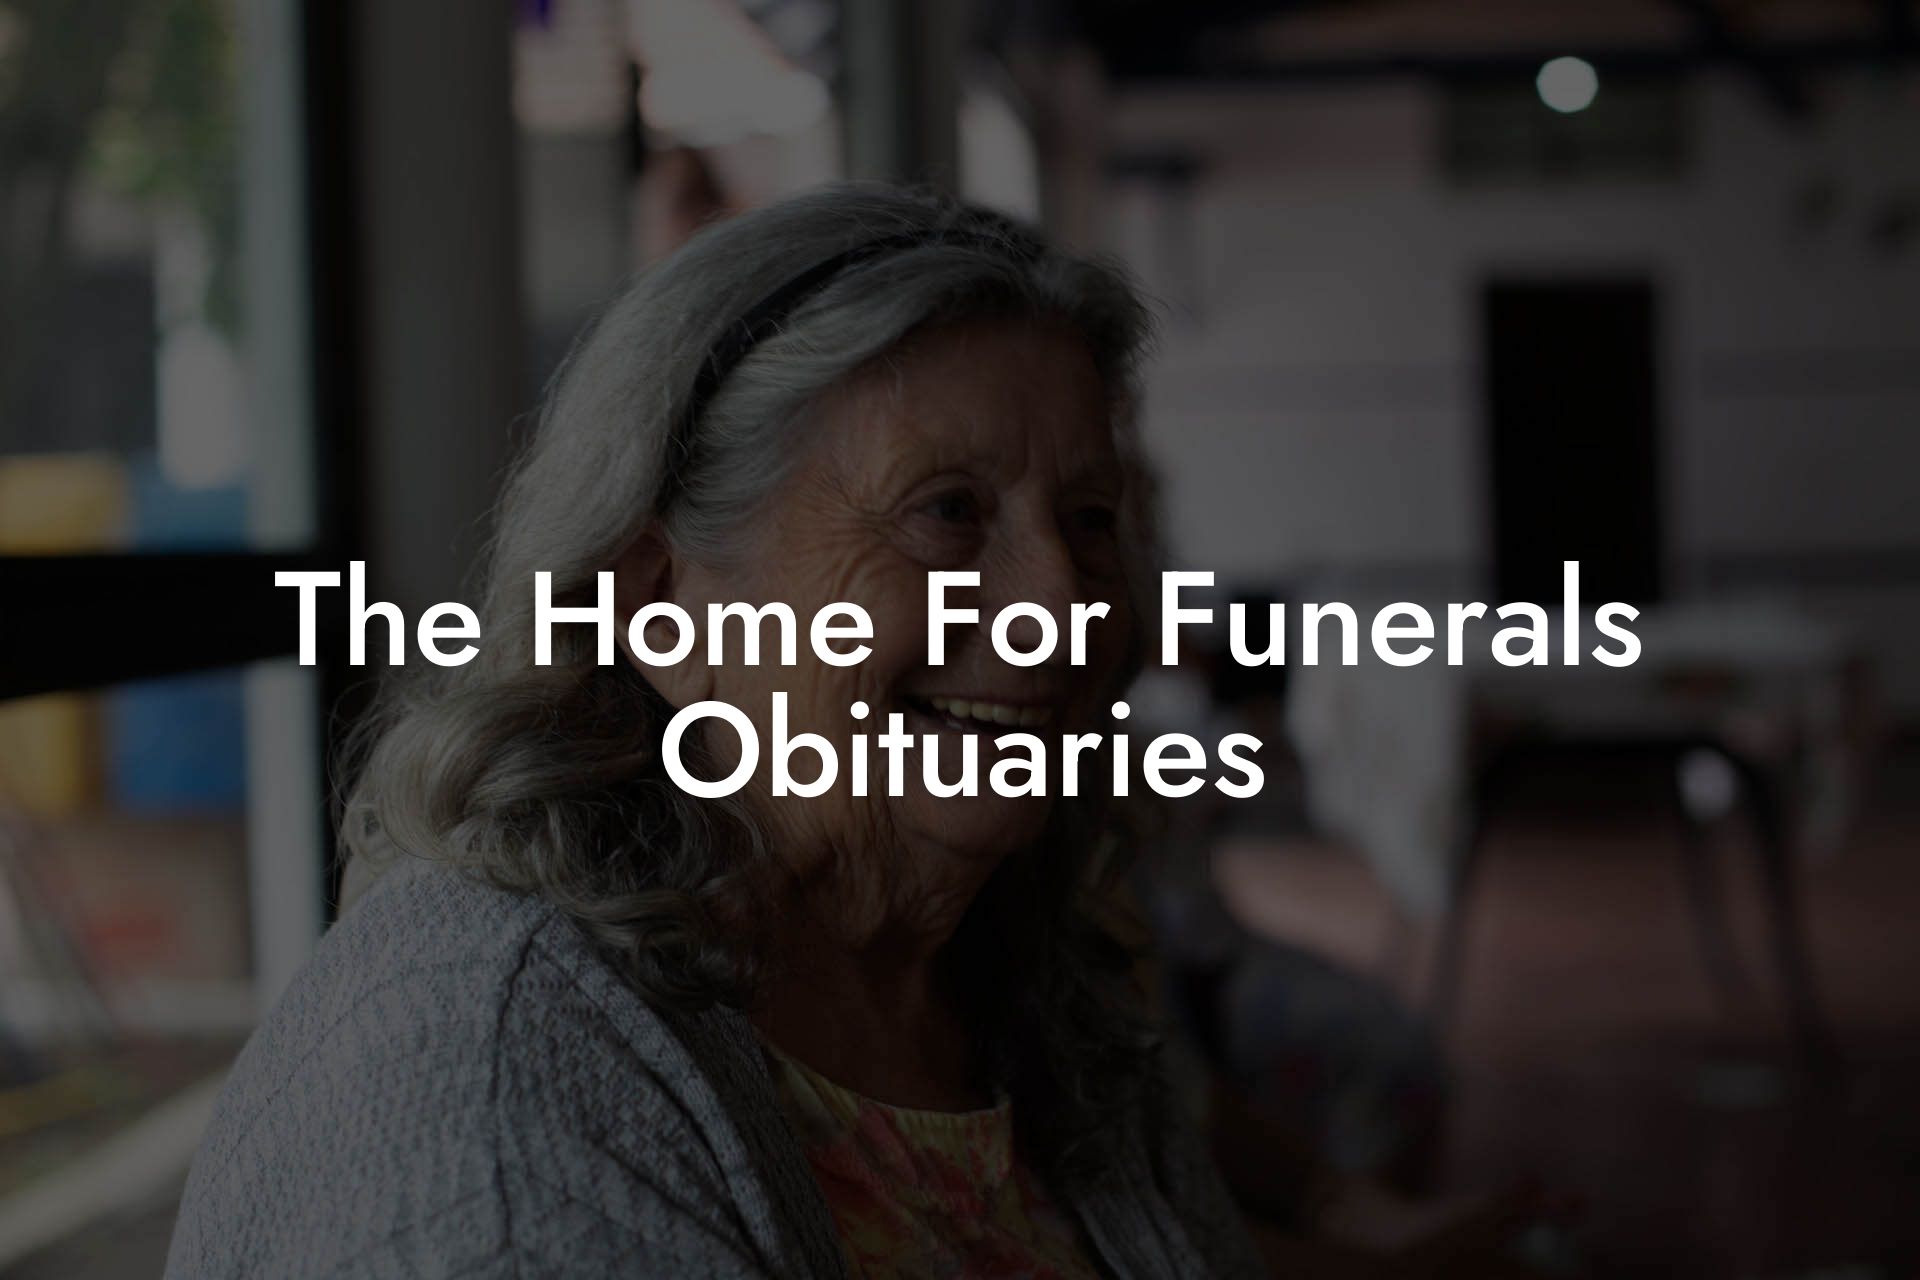 The Home For Funerals Obituaries